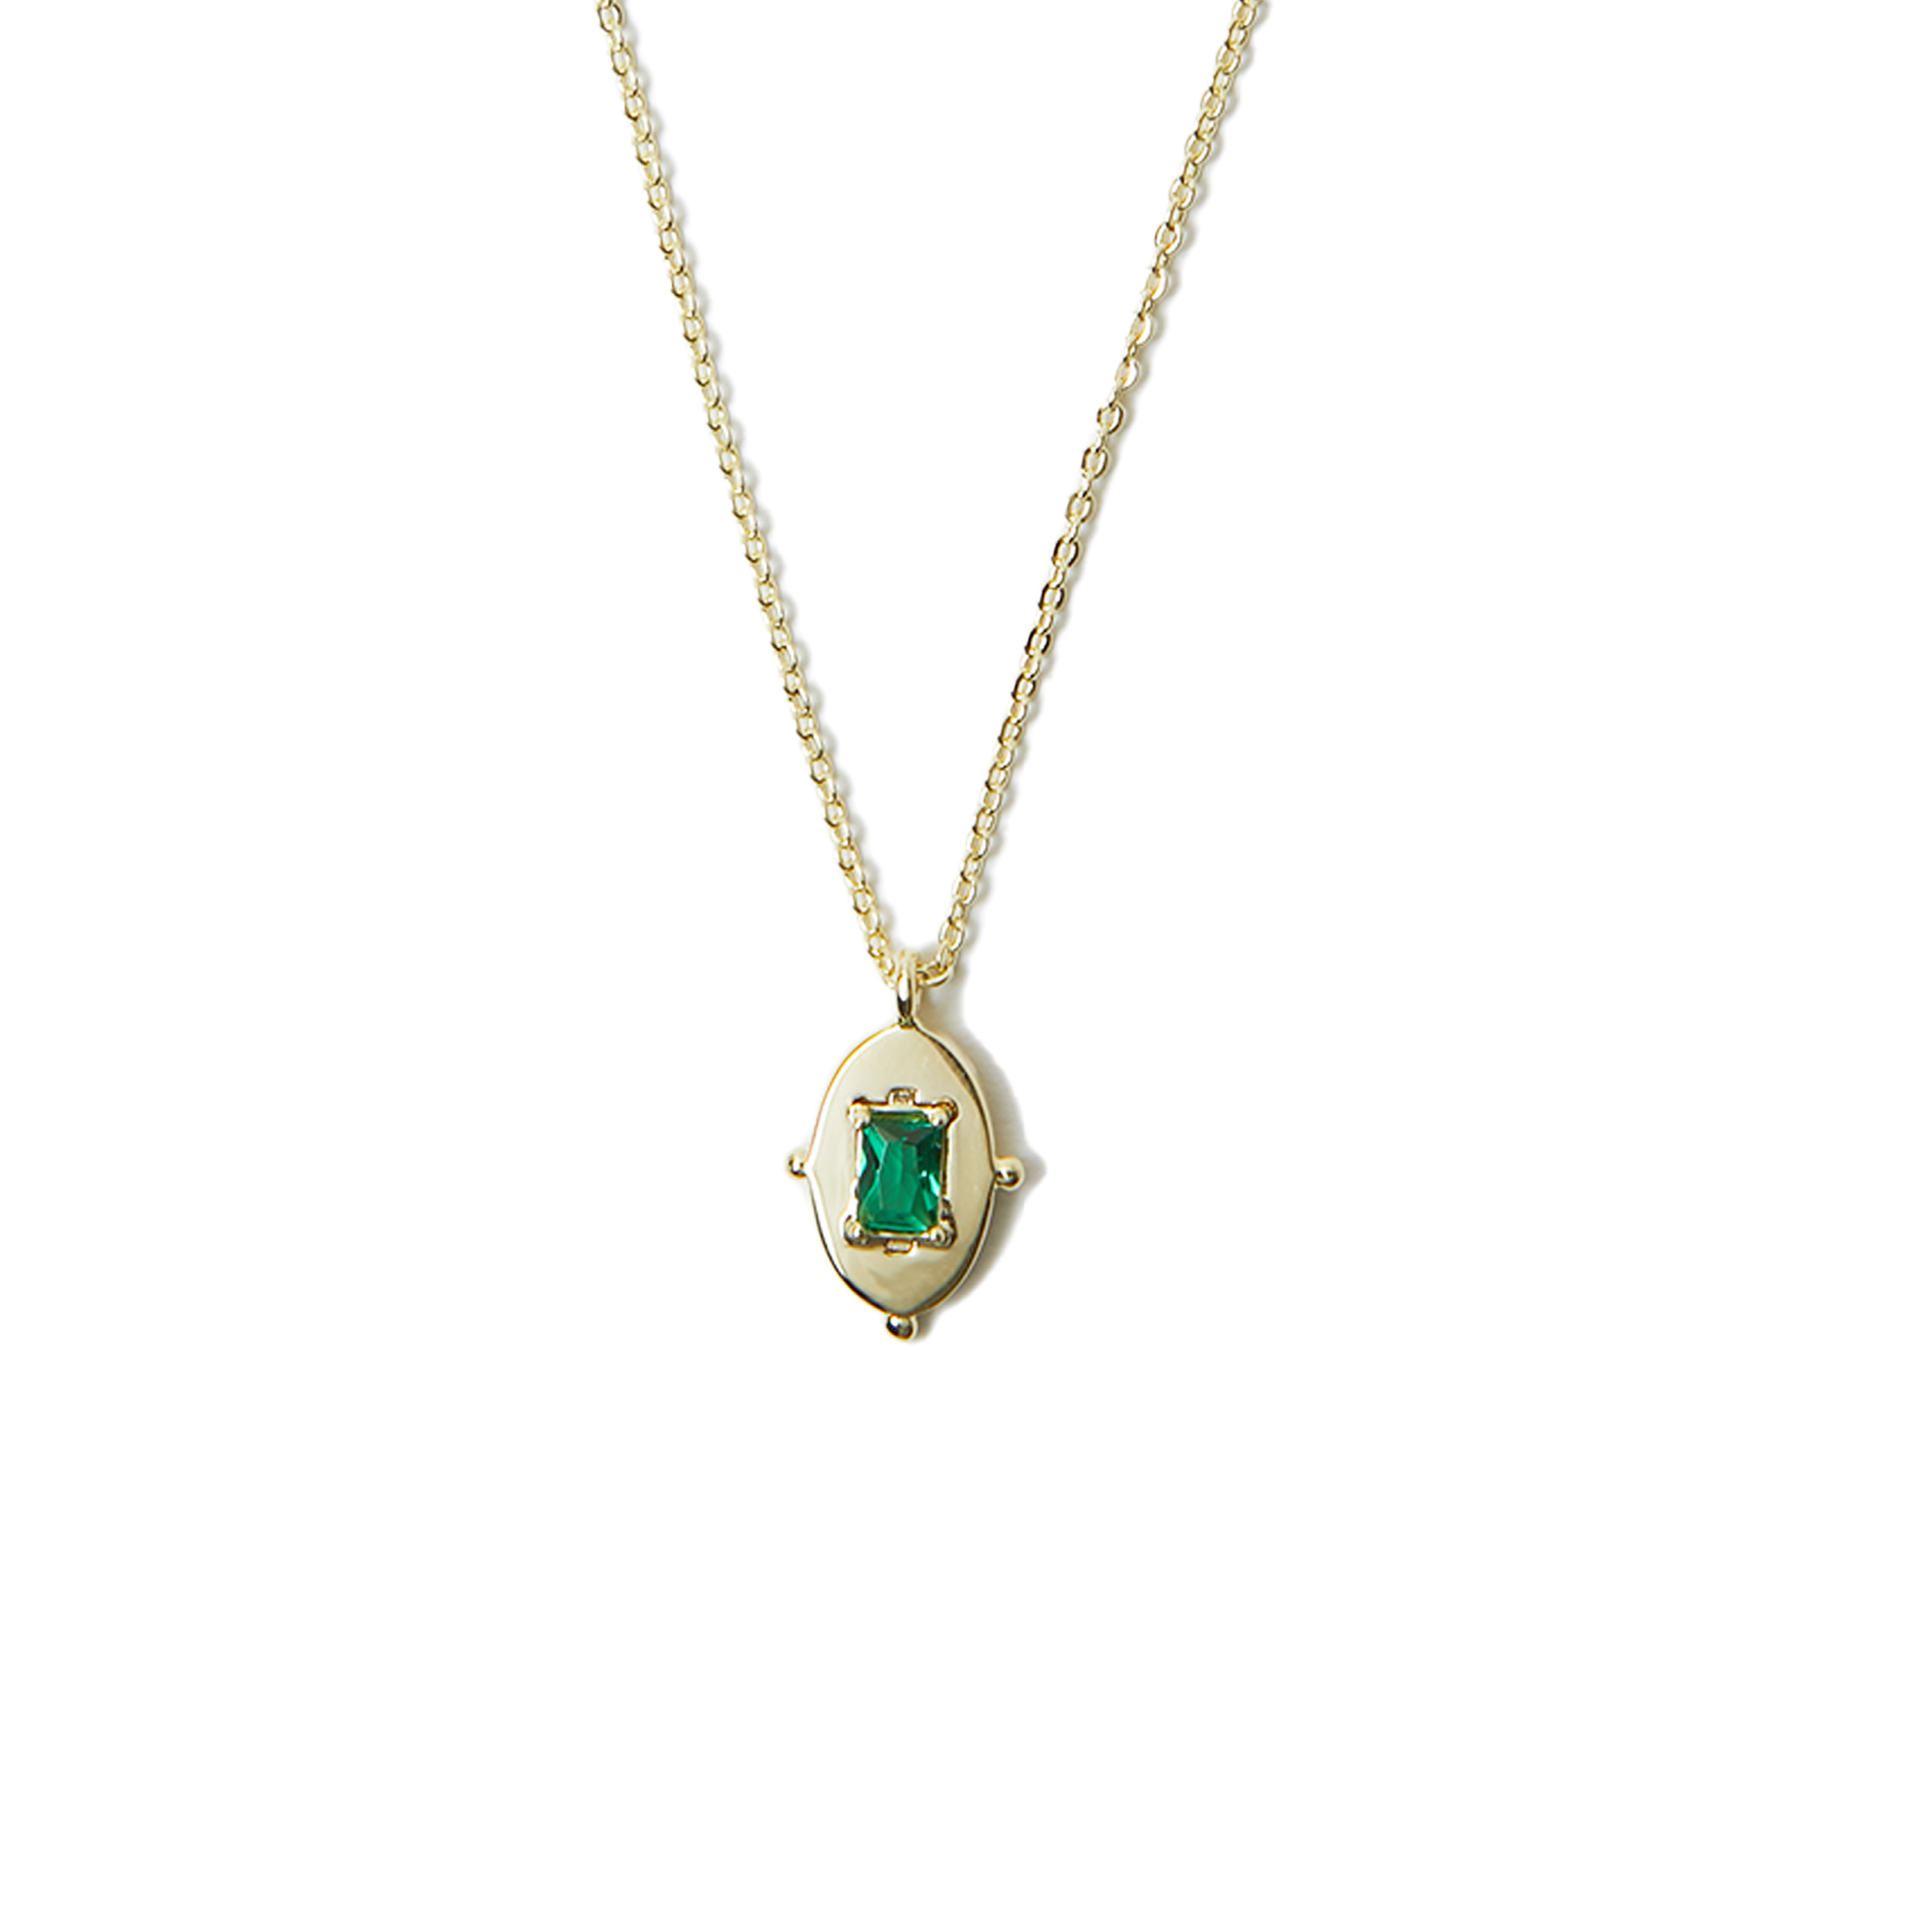 THE OVAL BAGUETTE NECKLACE